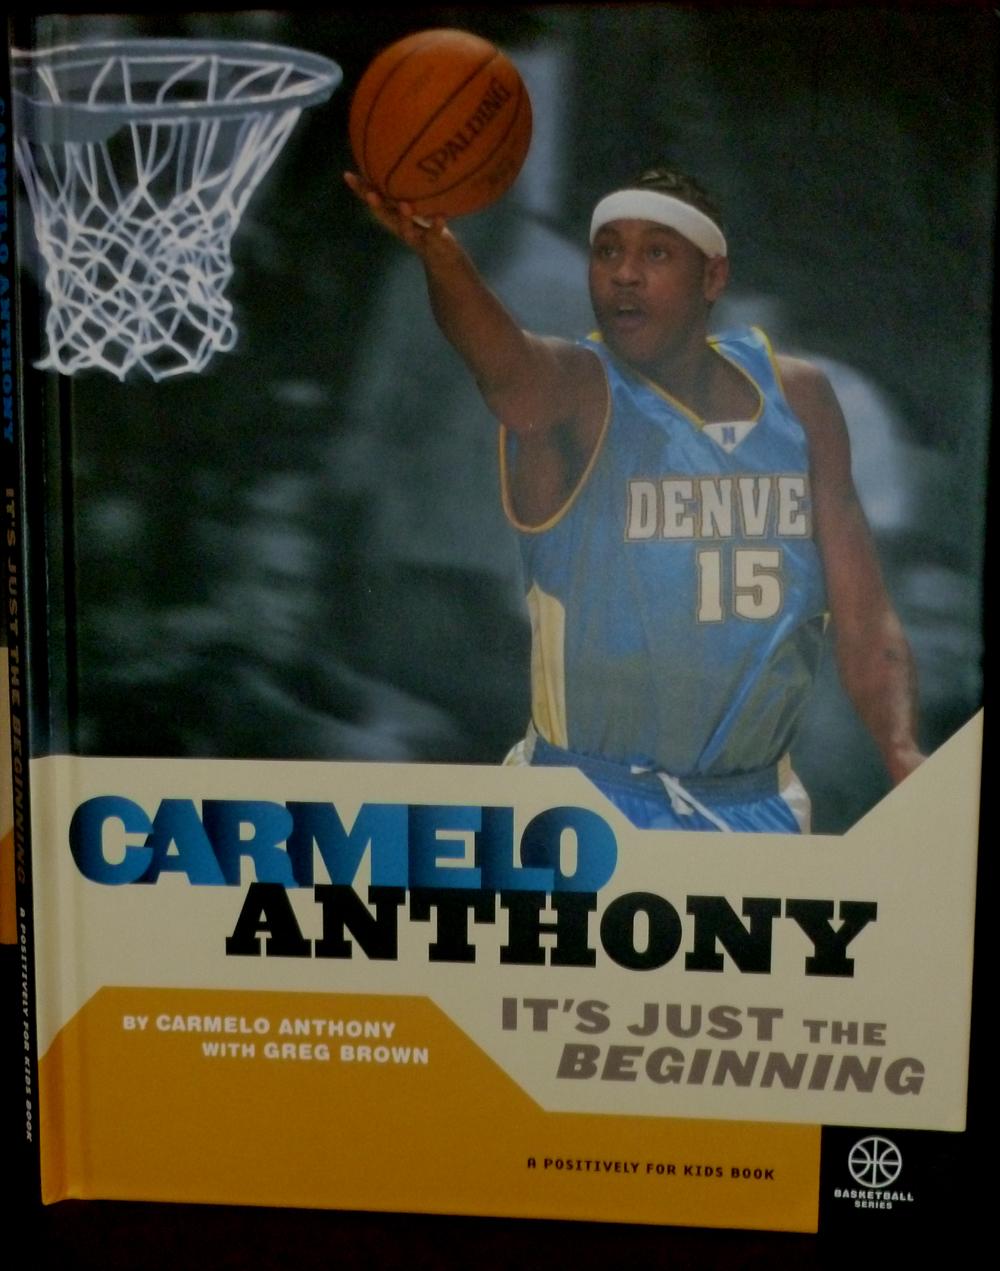 Carmelo Anthony: It's Just the Beginning (Basketball) by Carmelo Anthony  (2004-08-06)